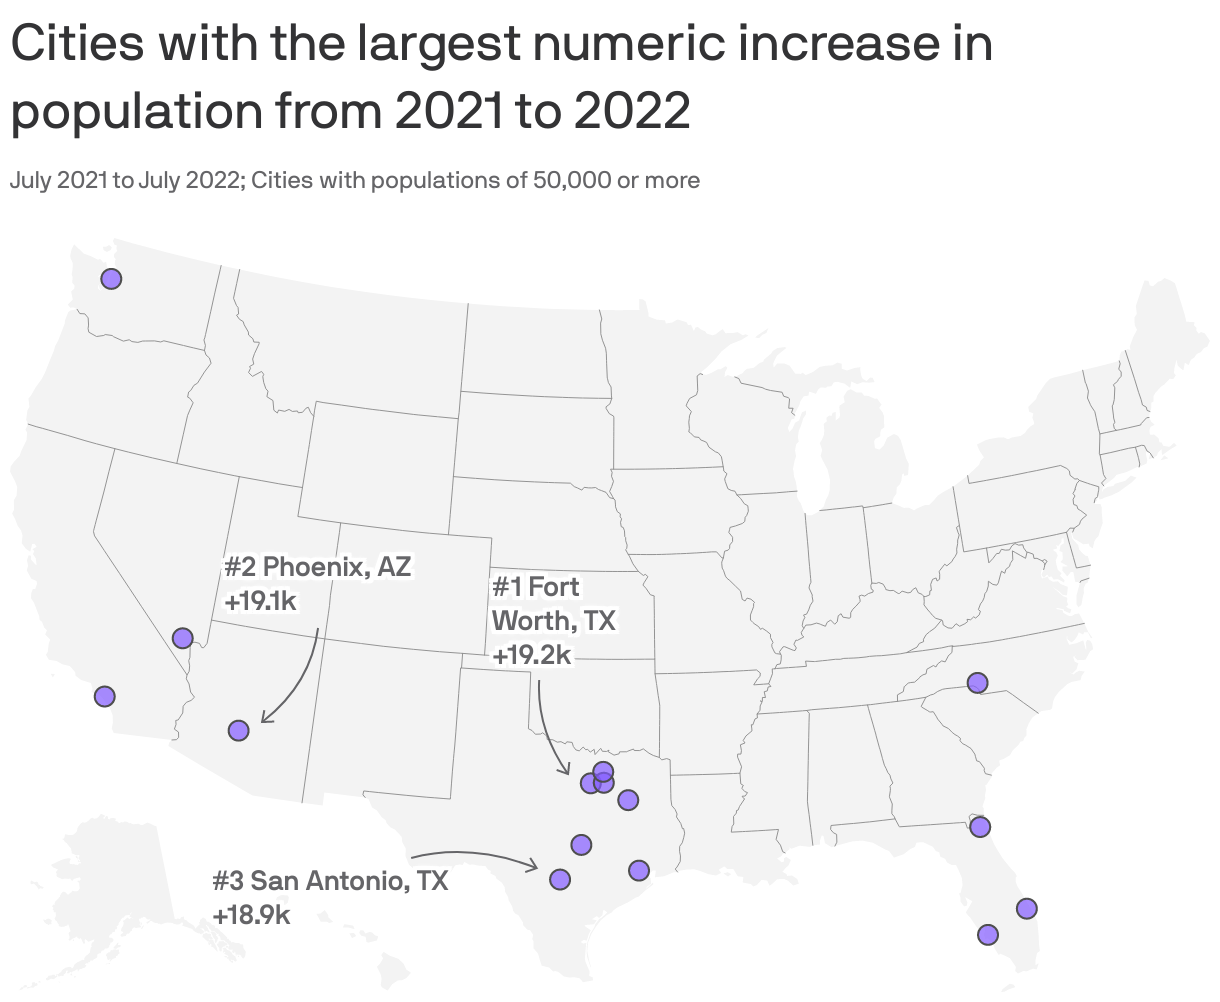 Cities with the largest numeric increase in population from 2021 to 2022